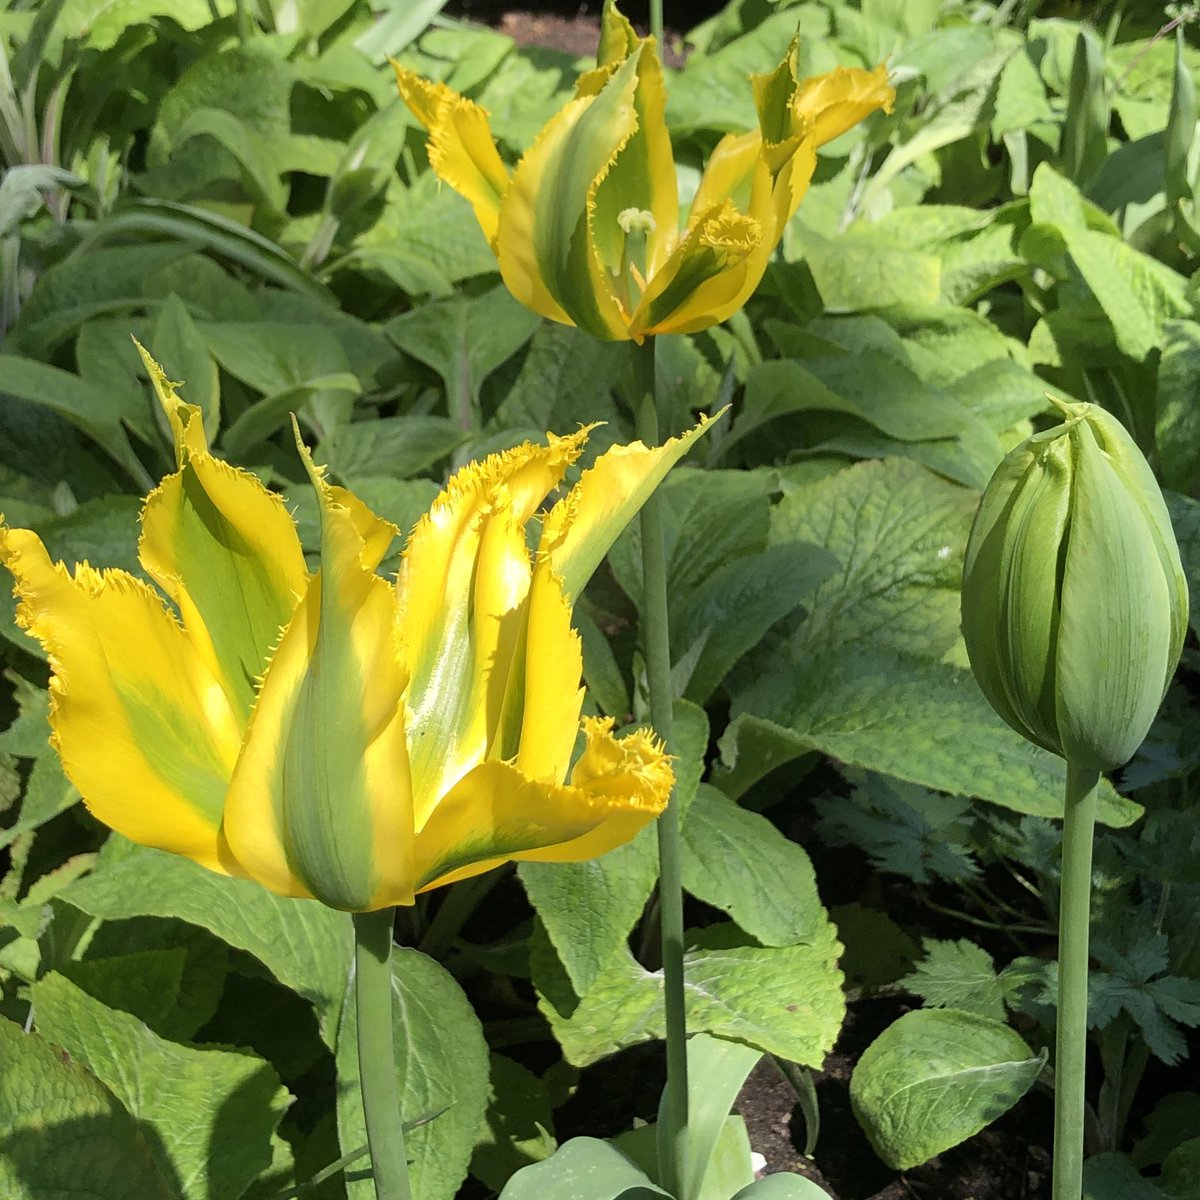 Happy Tuesday everyone! Saw these unusual tulips ⁦@Dorothyclive⁩ I love them! #TulipTuesday 💛💚 Enjoy your day (back to rain today!)